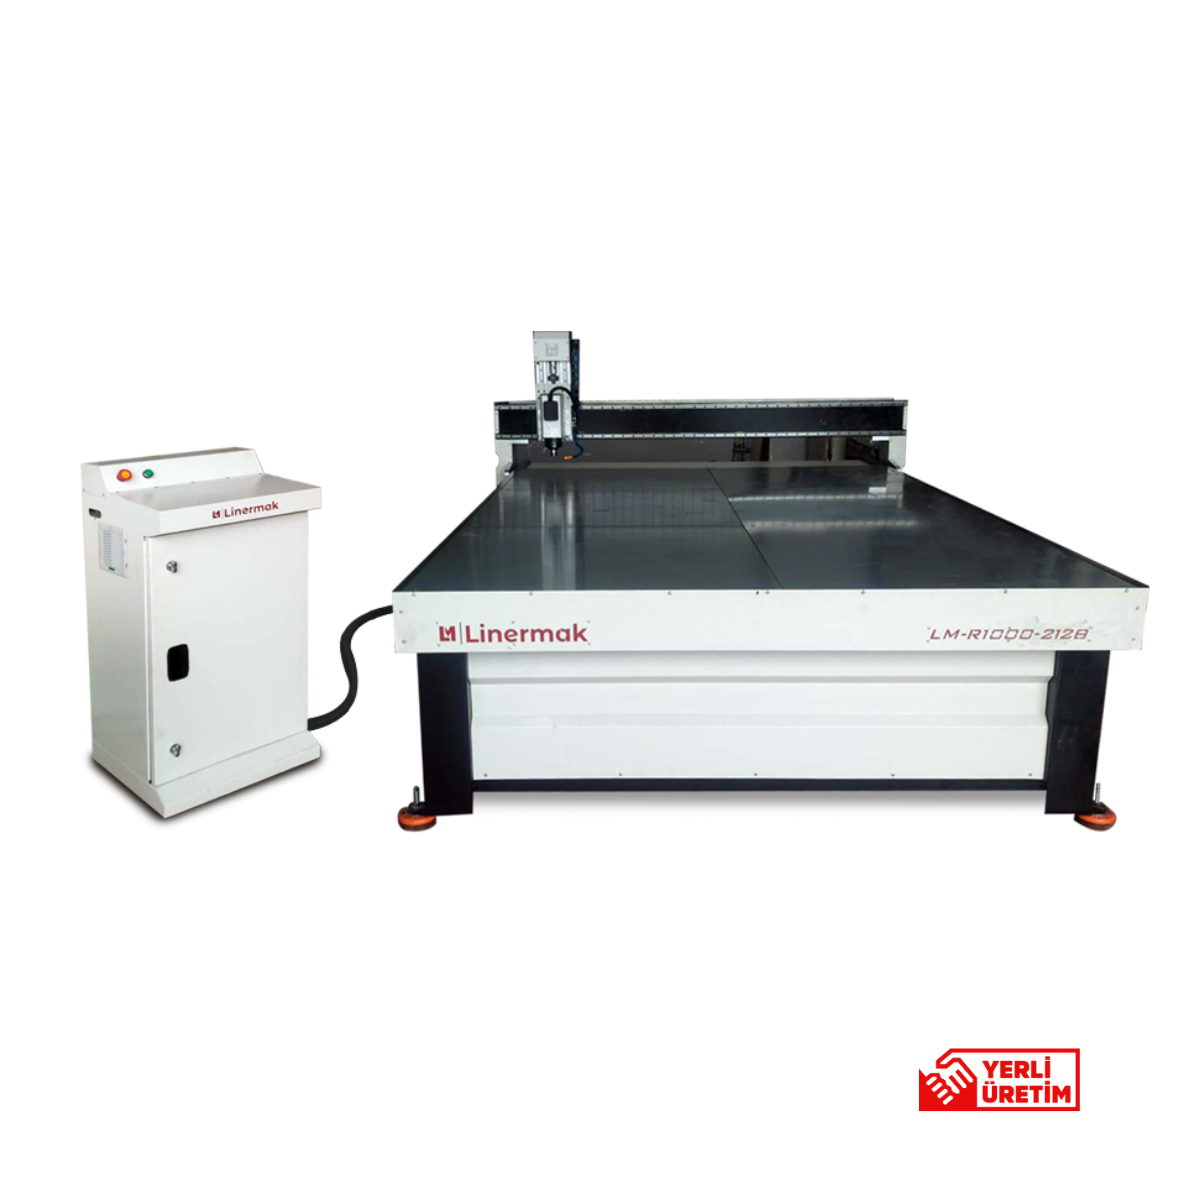 LM-R1000 Cnc Router Makinesi